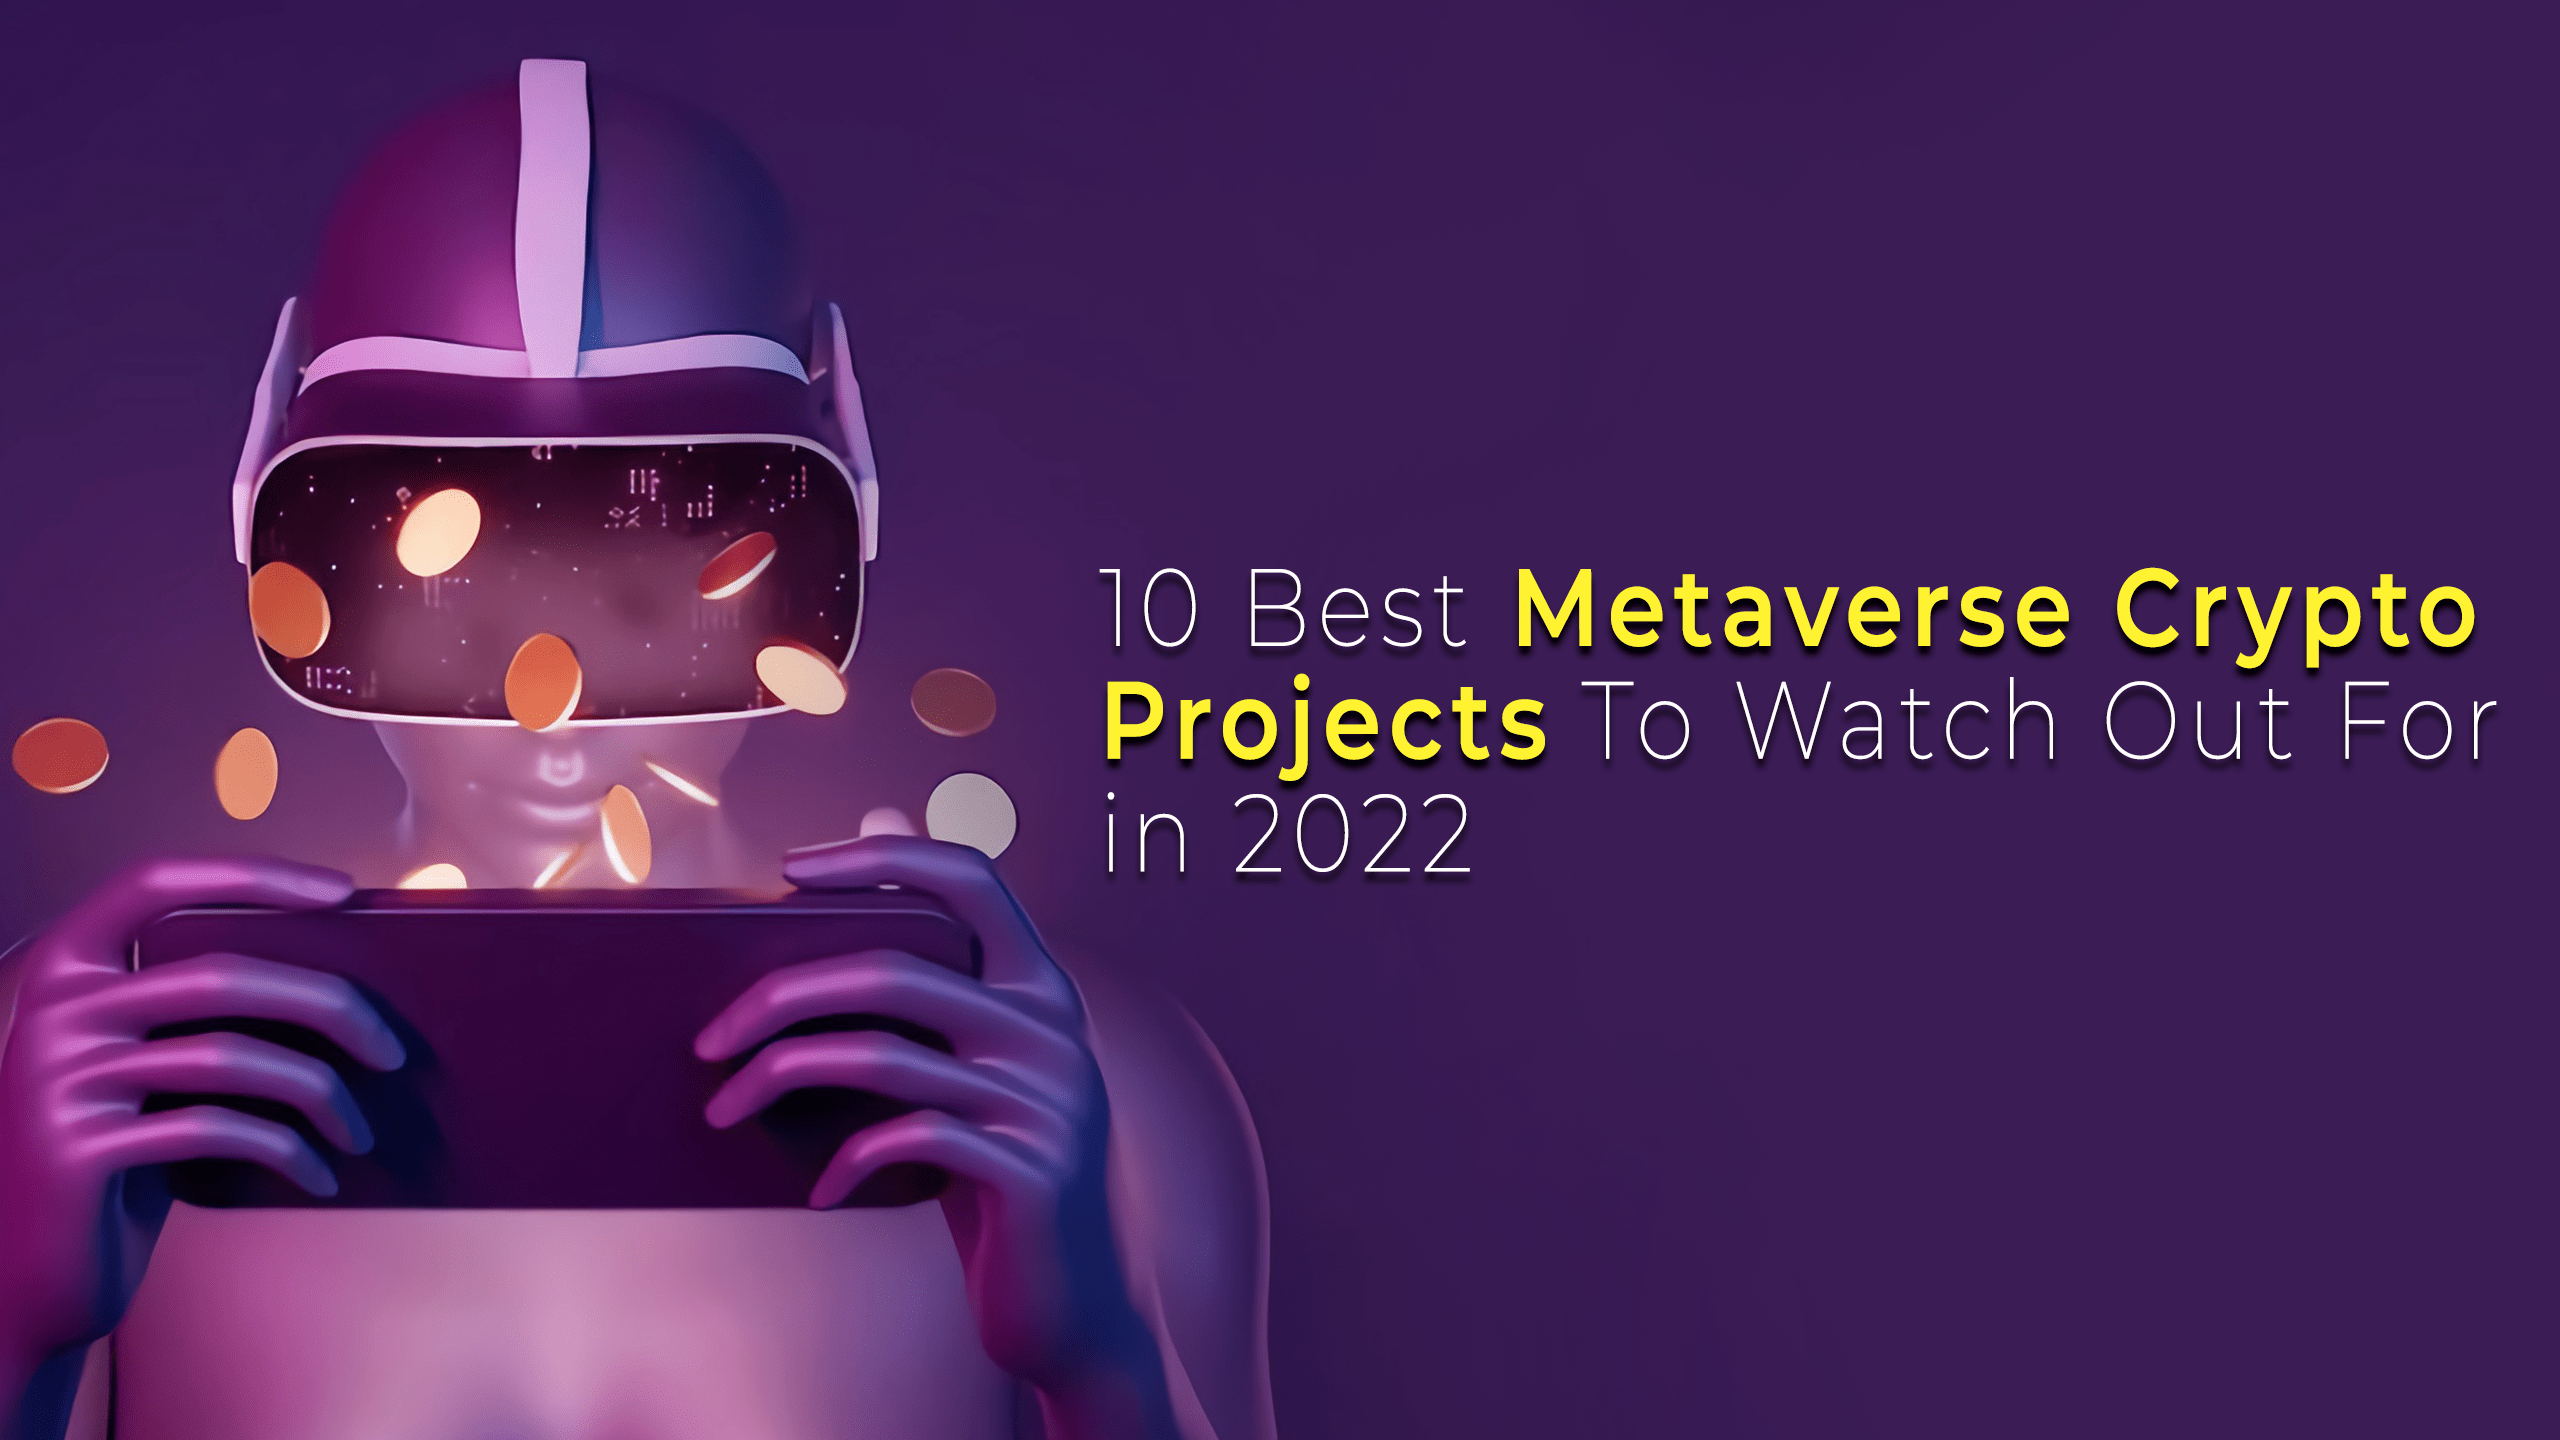 10 Best Metaverse Crypto Projects To Watch Out For in 2022 Web 3.0 India